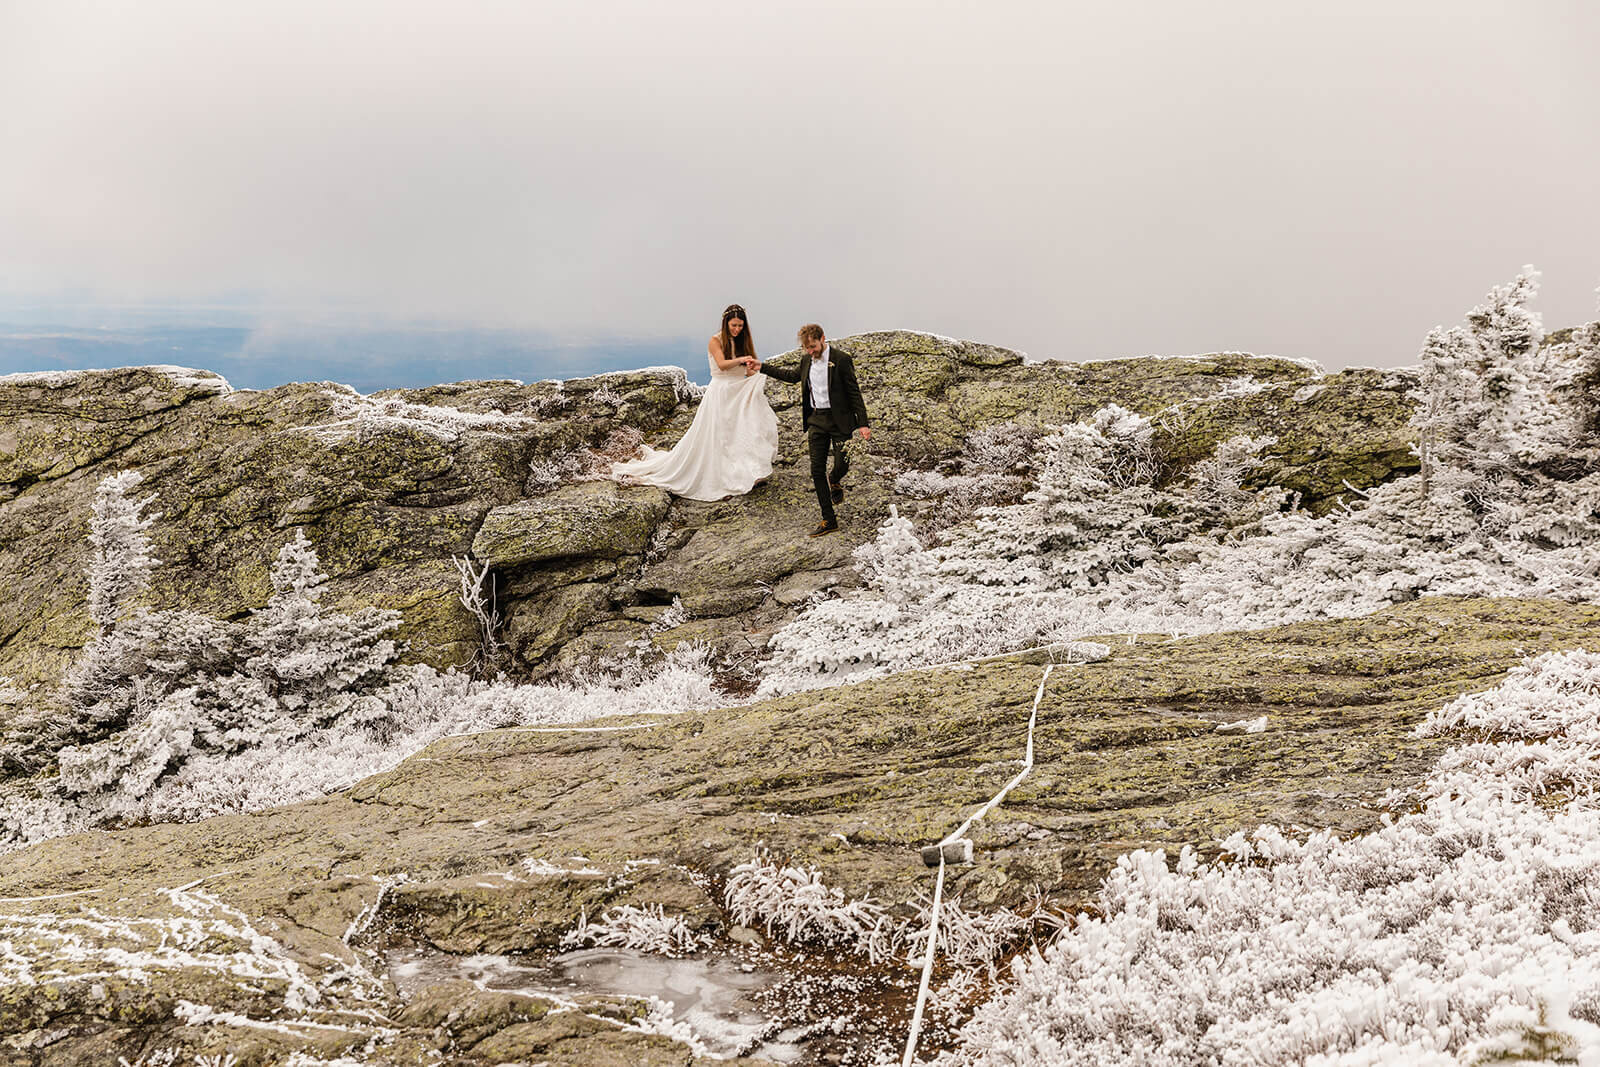  Eloping couple explores summit during their adventure elopement on Mt. Mansfield, Vermont’s tallest mountain.  Vermont mountain wedding. Vermont winter elopement. Vermont elopement packages. 